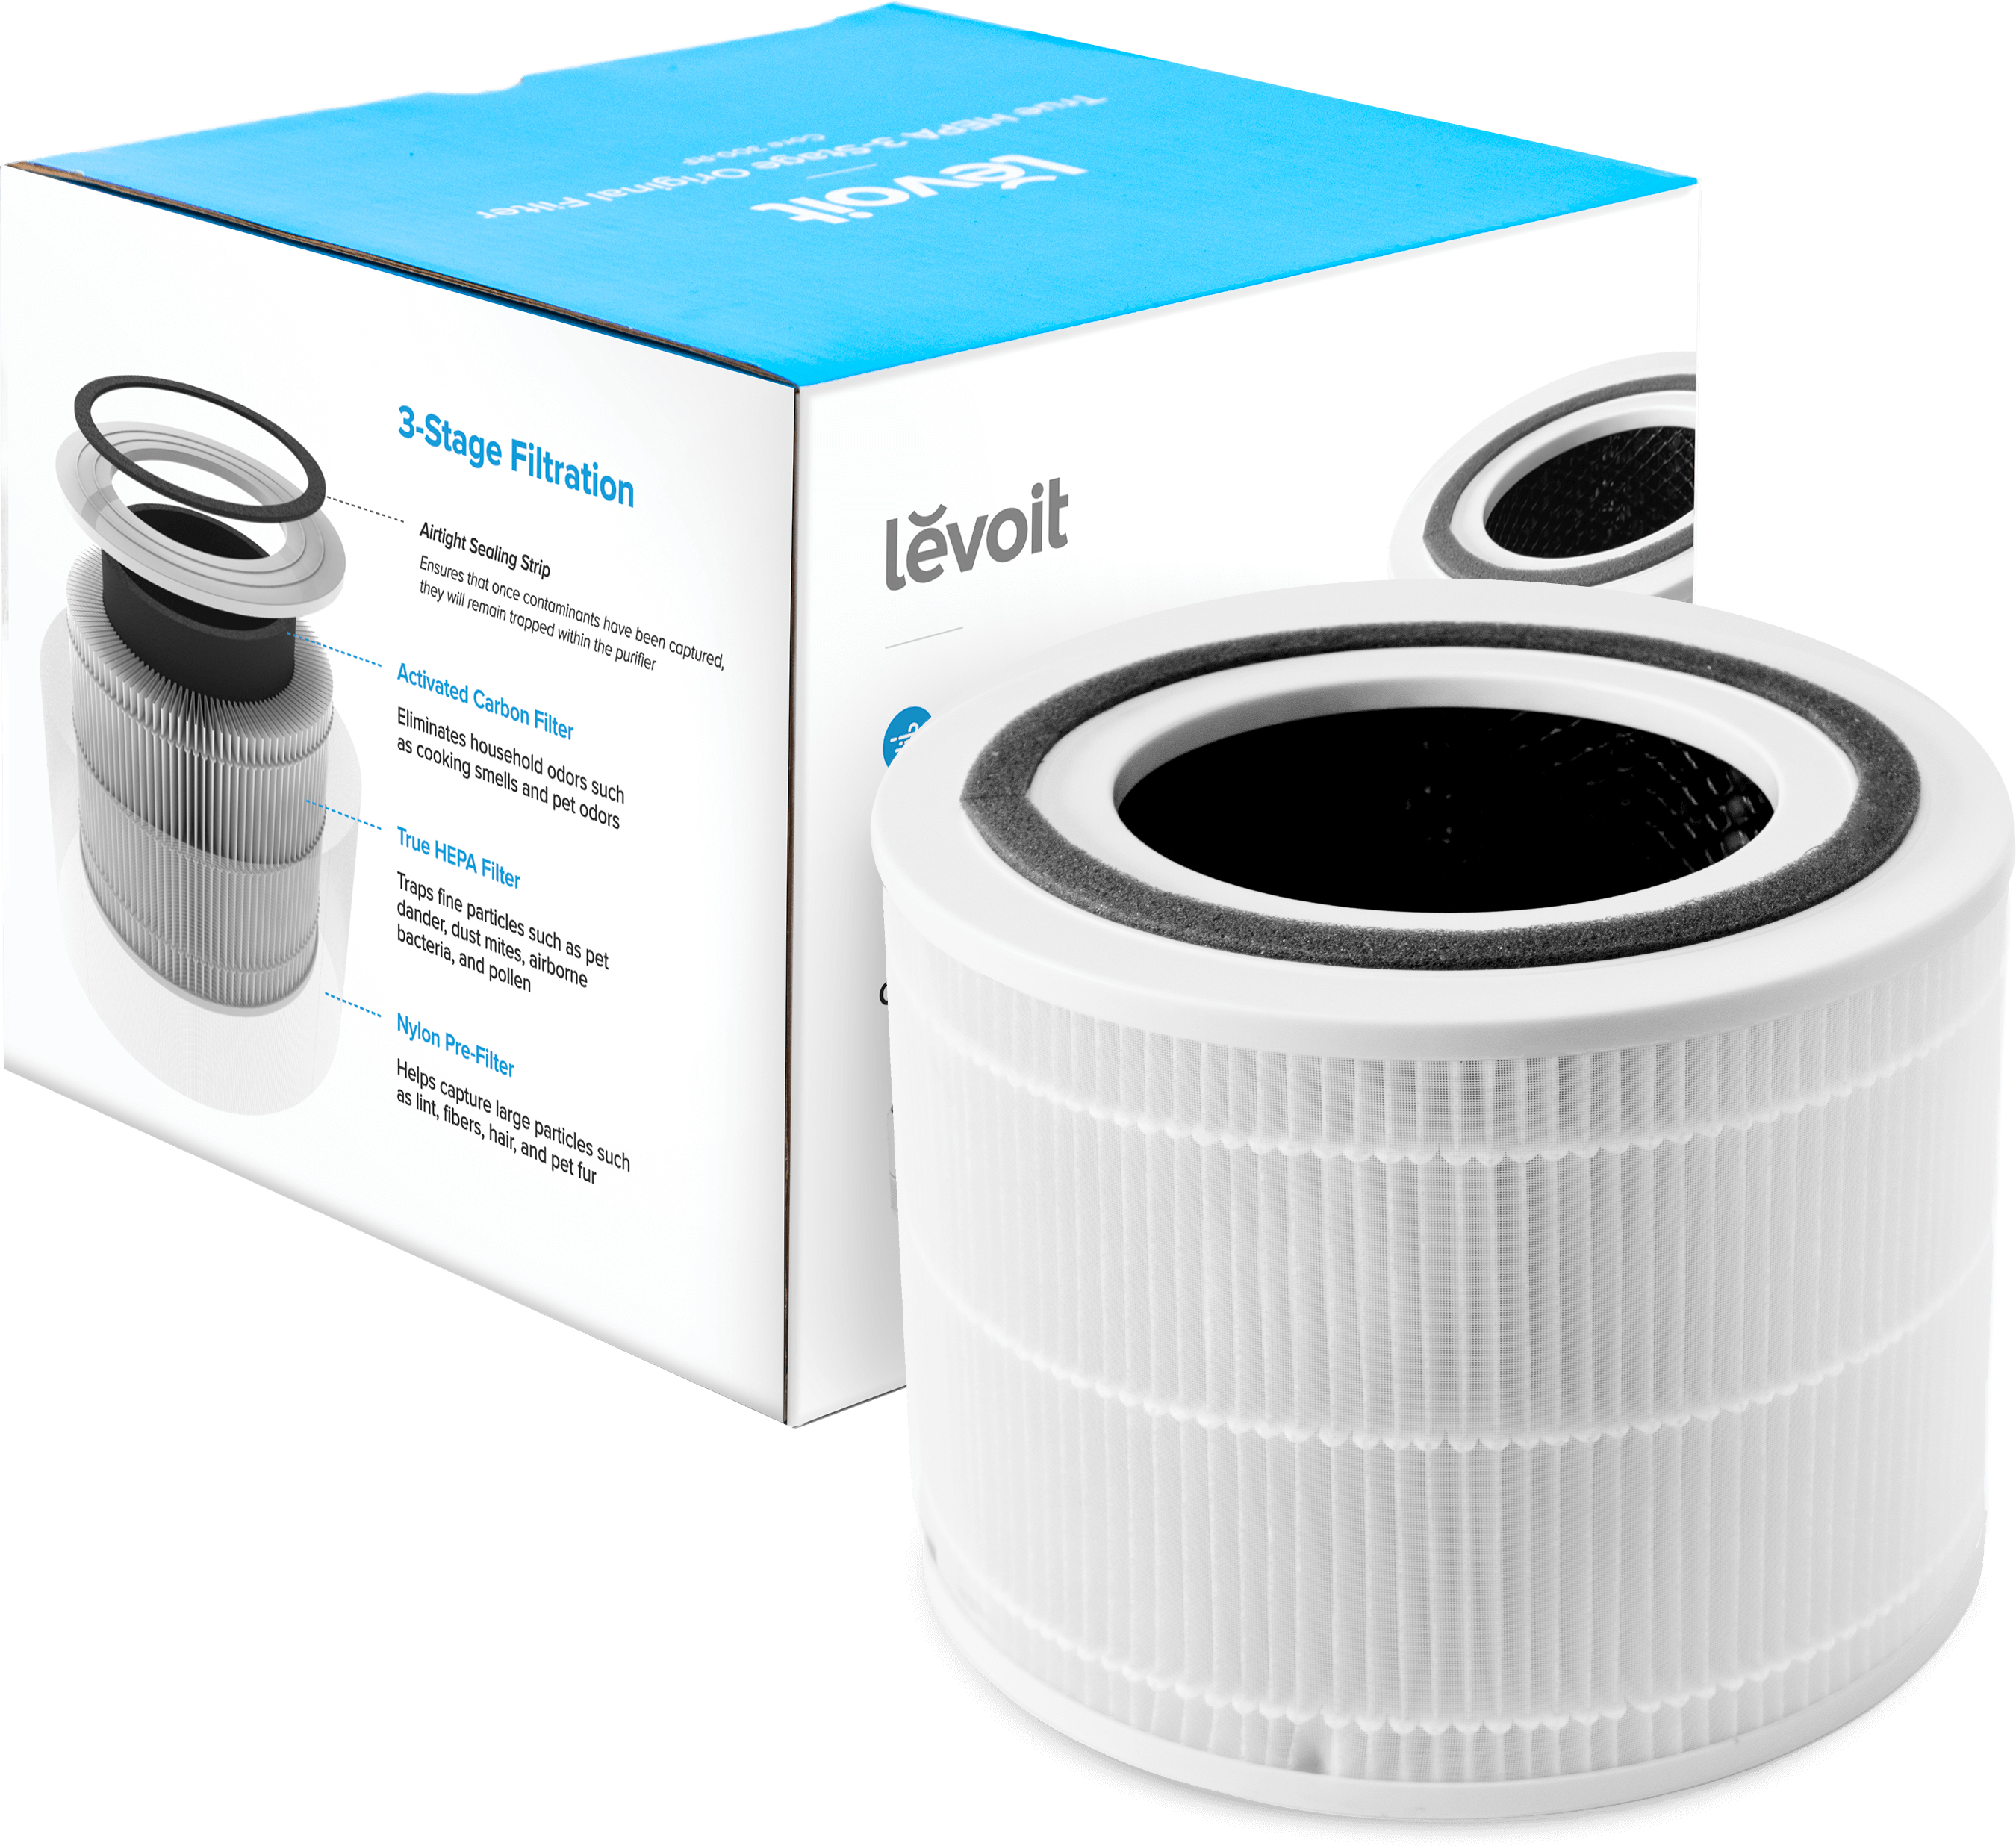 Levoit Air Cleaner Filter Core 300 True HEPA 3-Stage